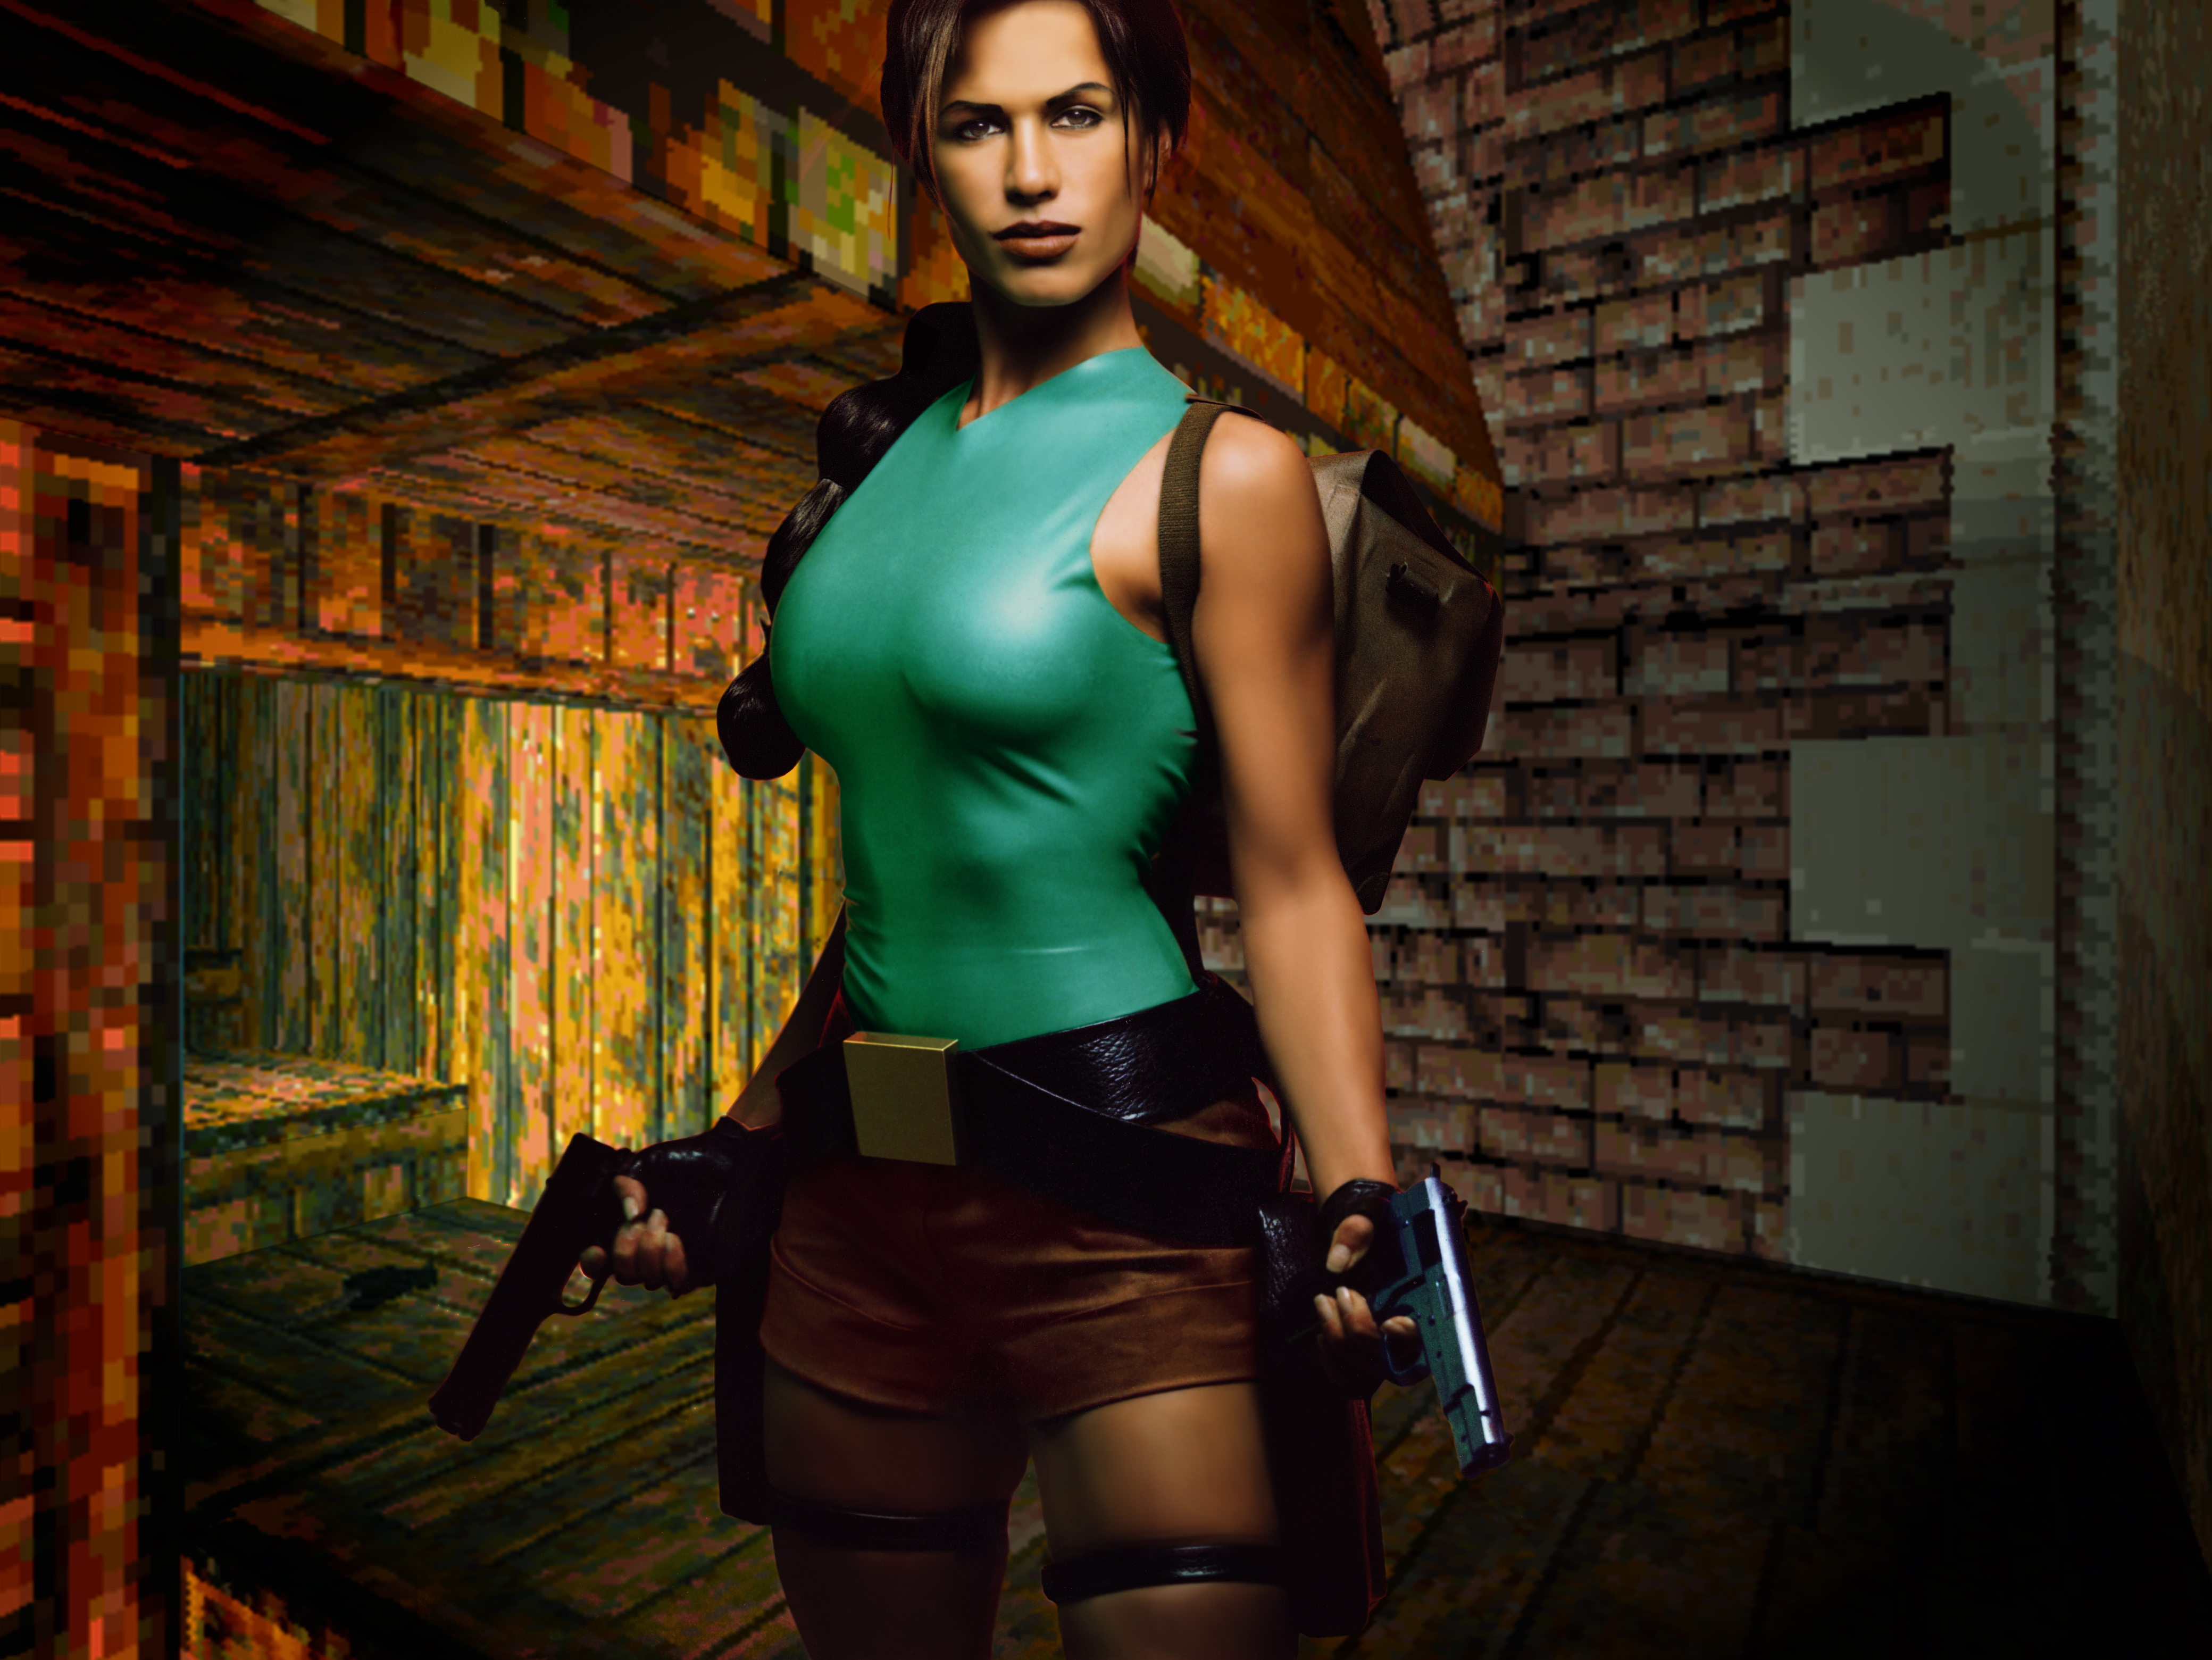 Tomb Raider The Official Models Picture Gallery Section 